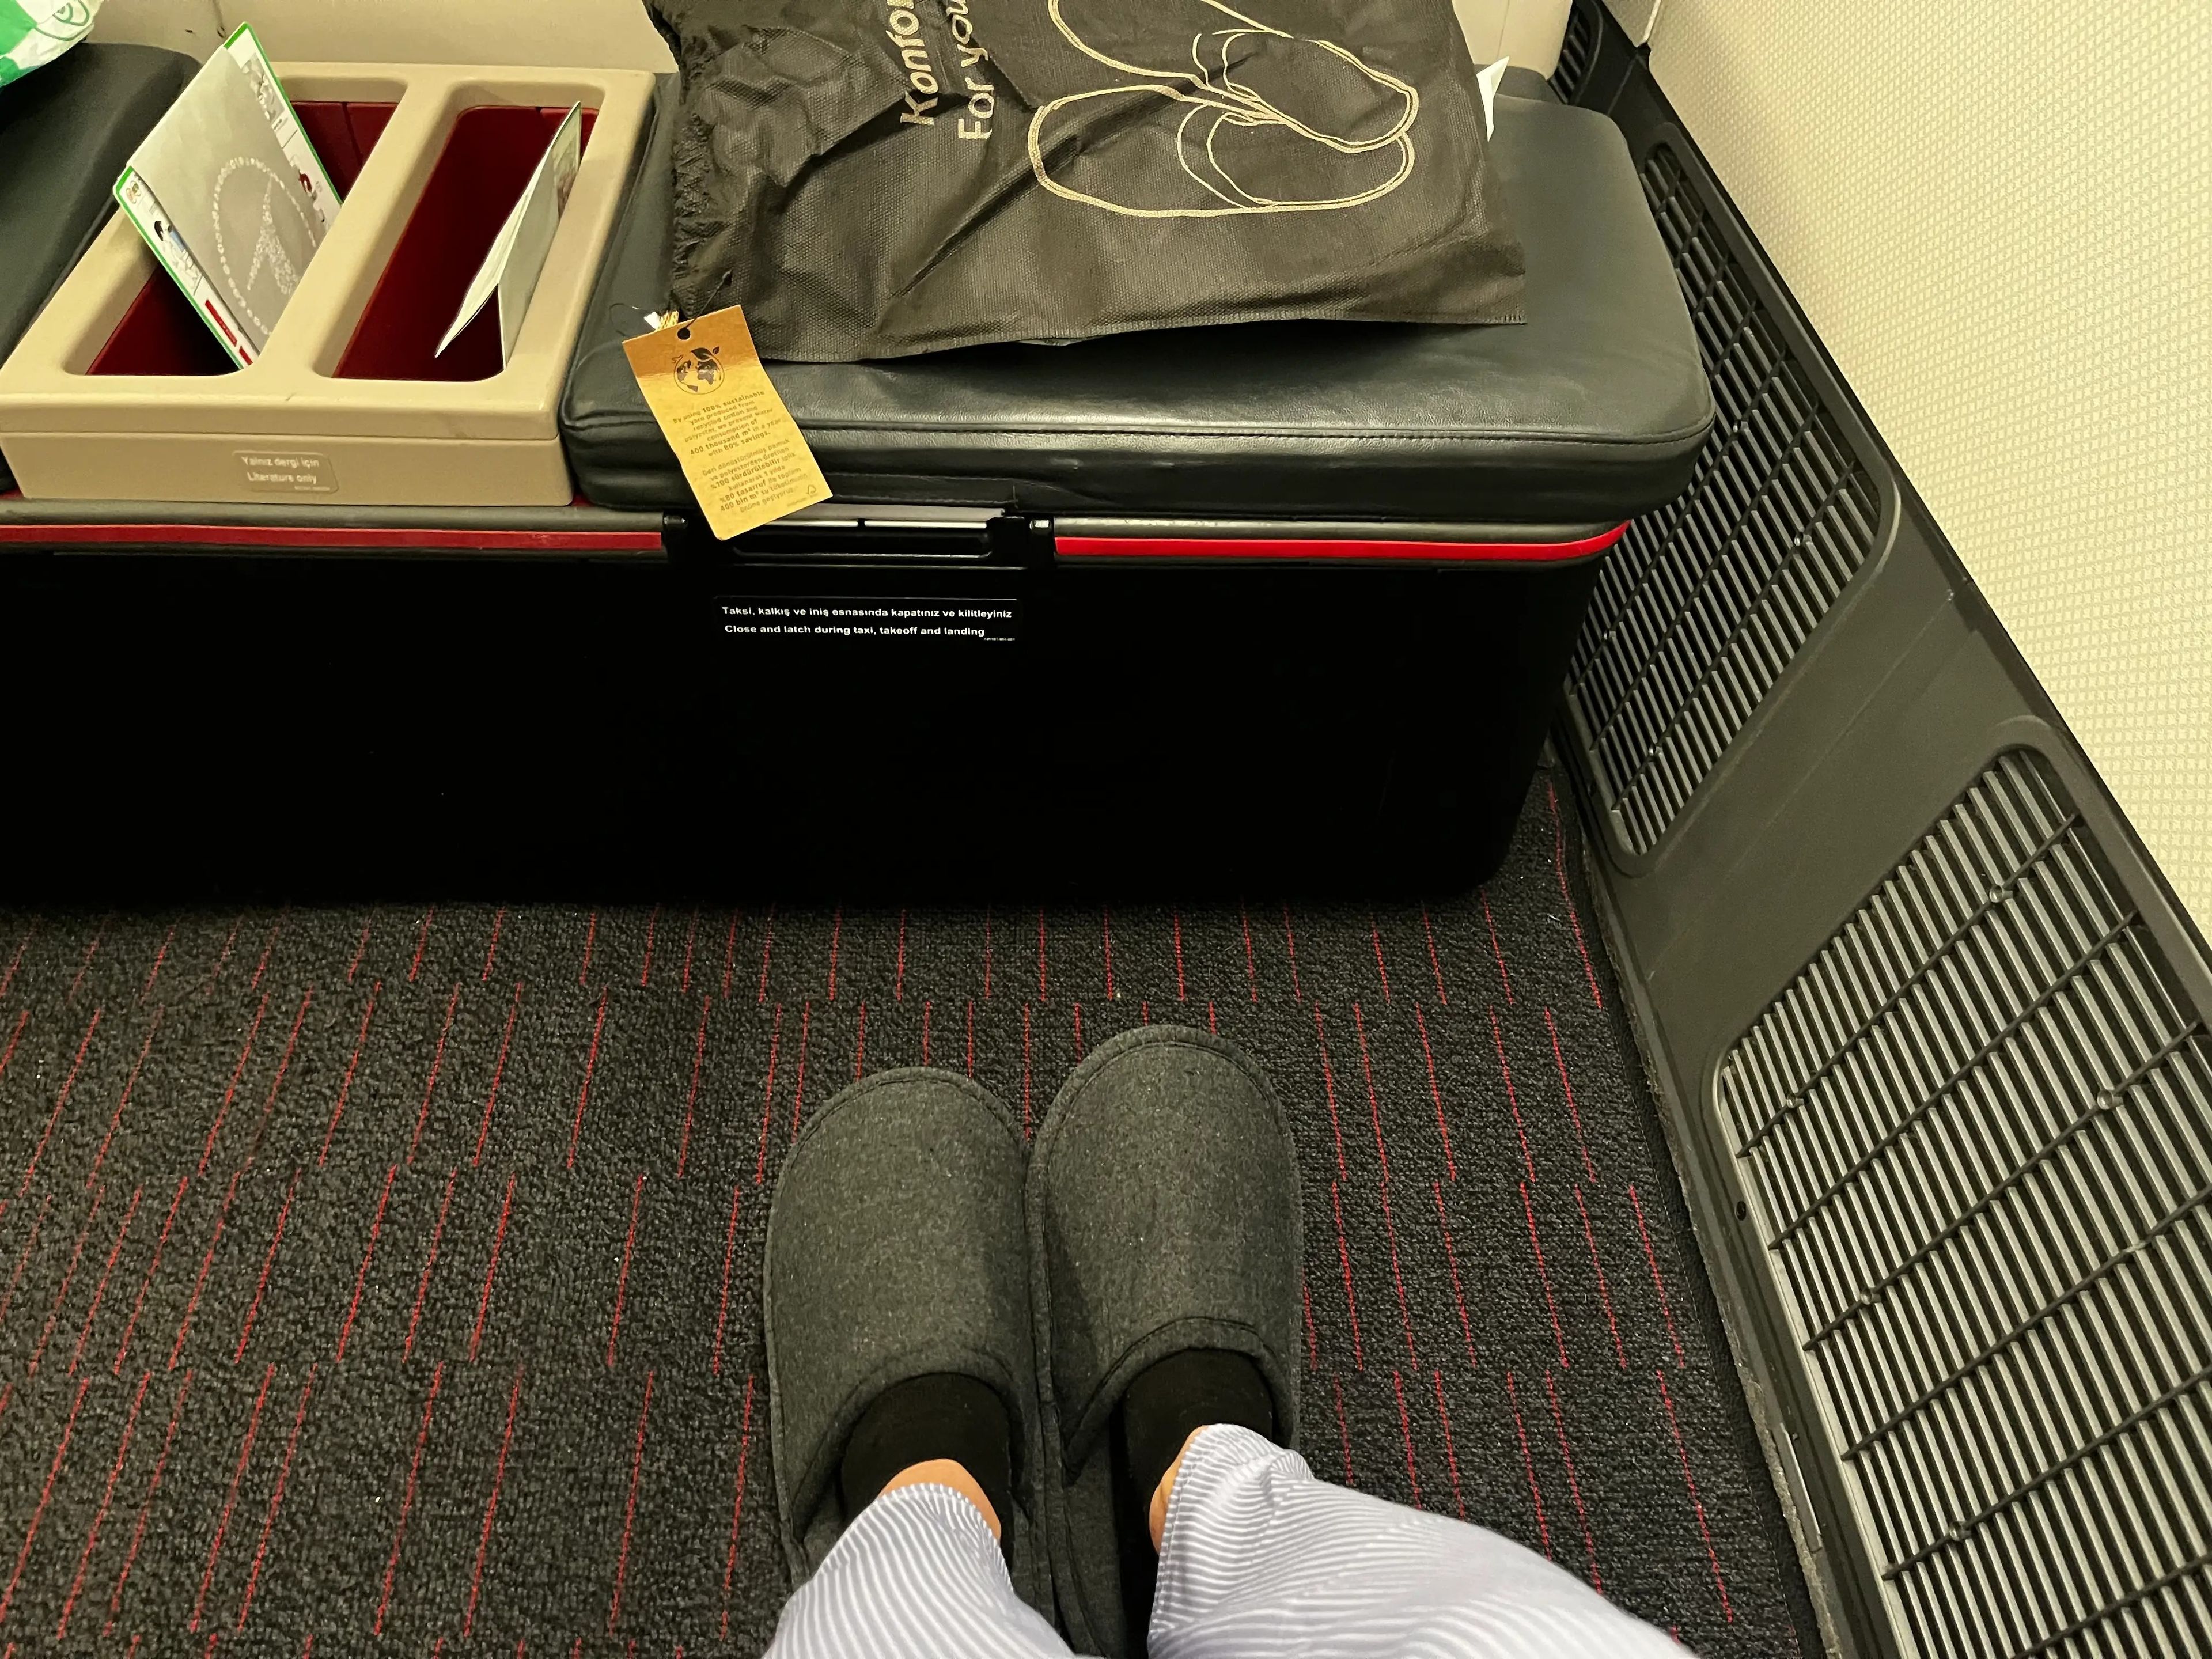 The writer's feet in black slippers and a black box with amenities in front of her on flight